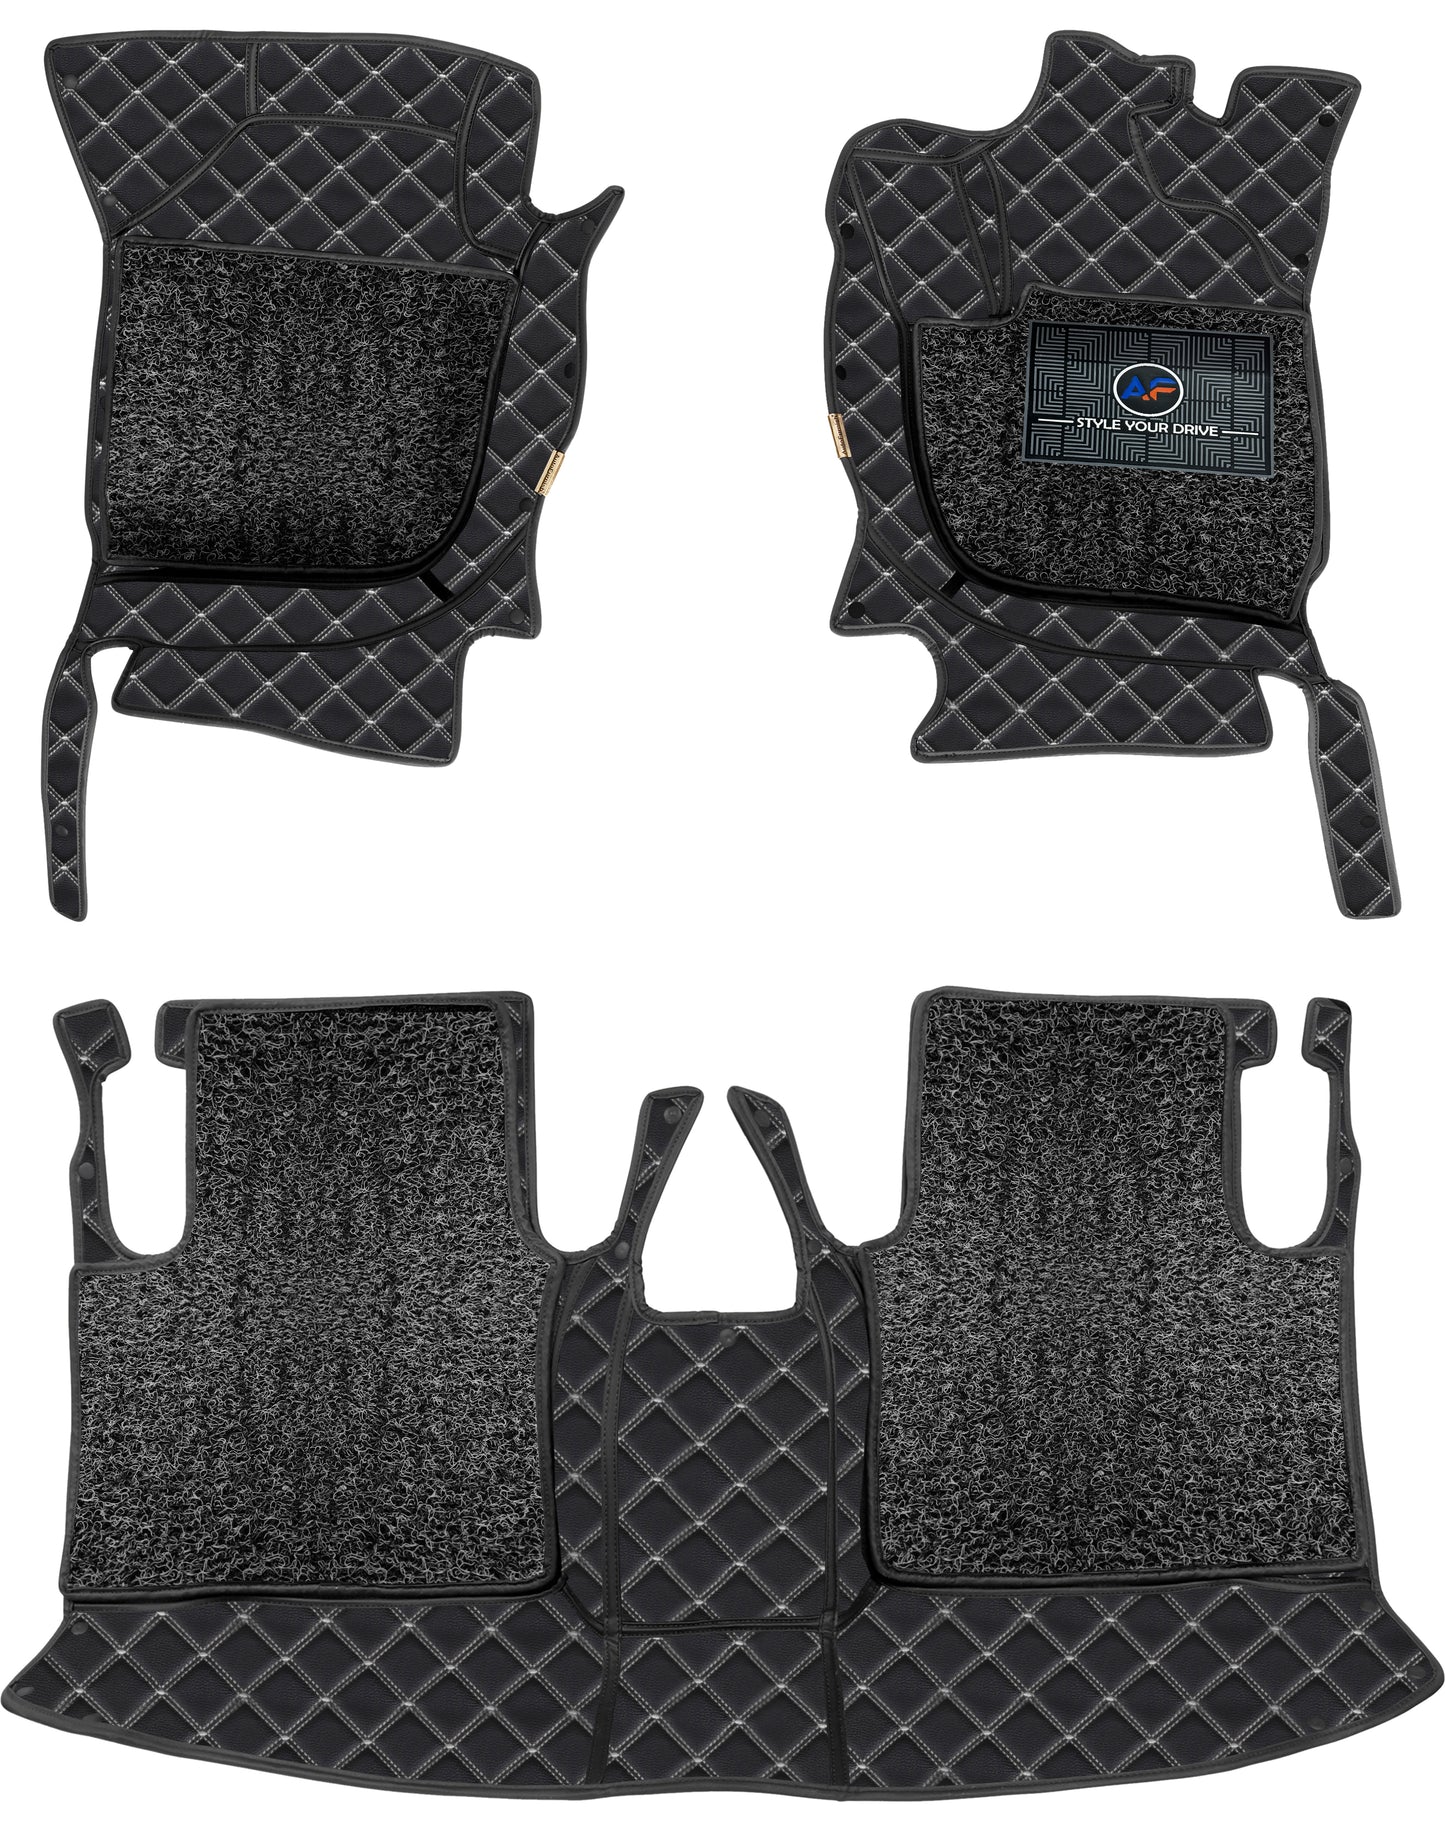 Hyundai Tucson 2022-7D Luxury Car Mat, All Weather Proof, Anti-Skid, 100% Waterproof & Odorless with Unique Diamond Fish Design (24mm Luxury PU Leather, 2 Rows)